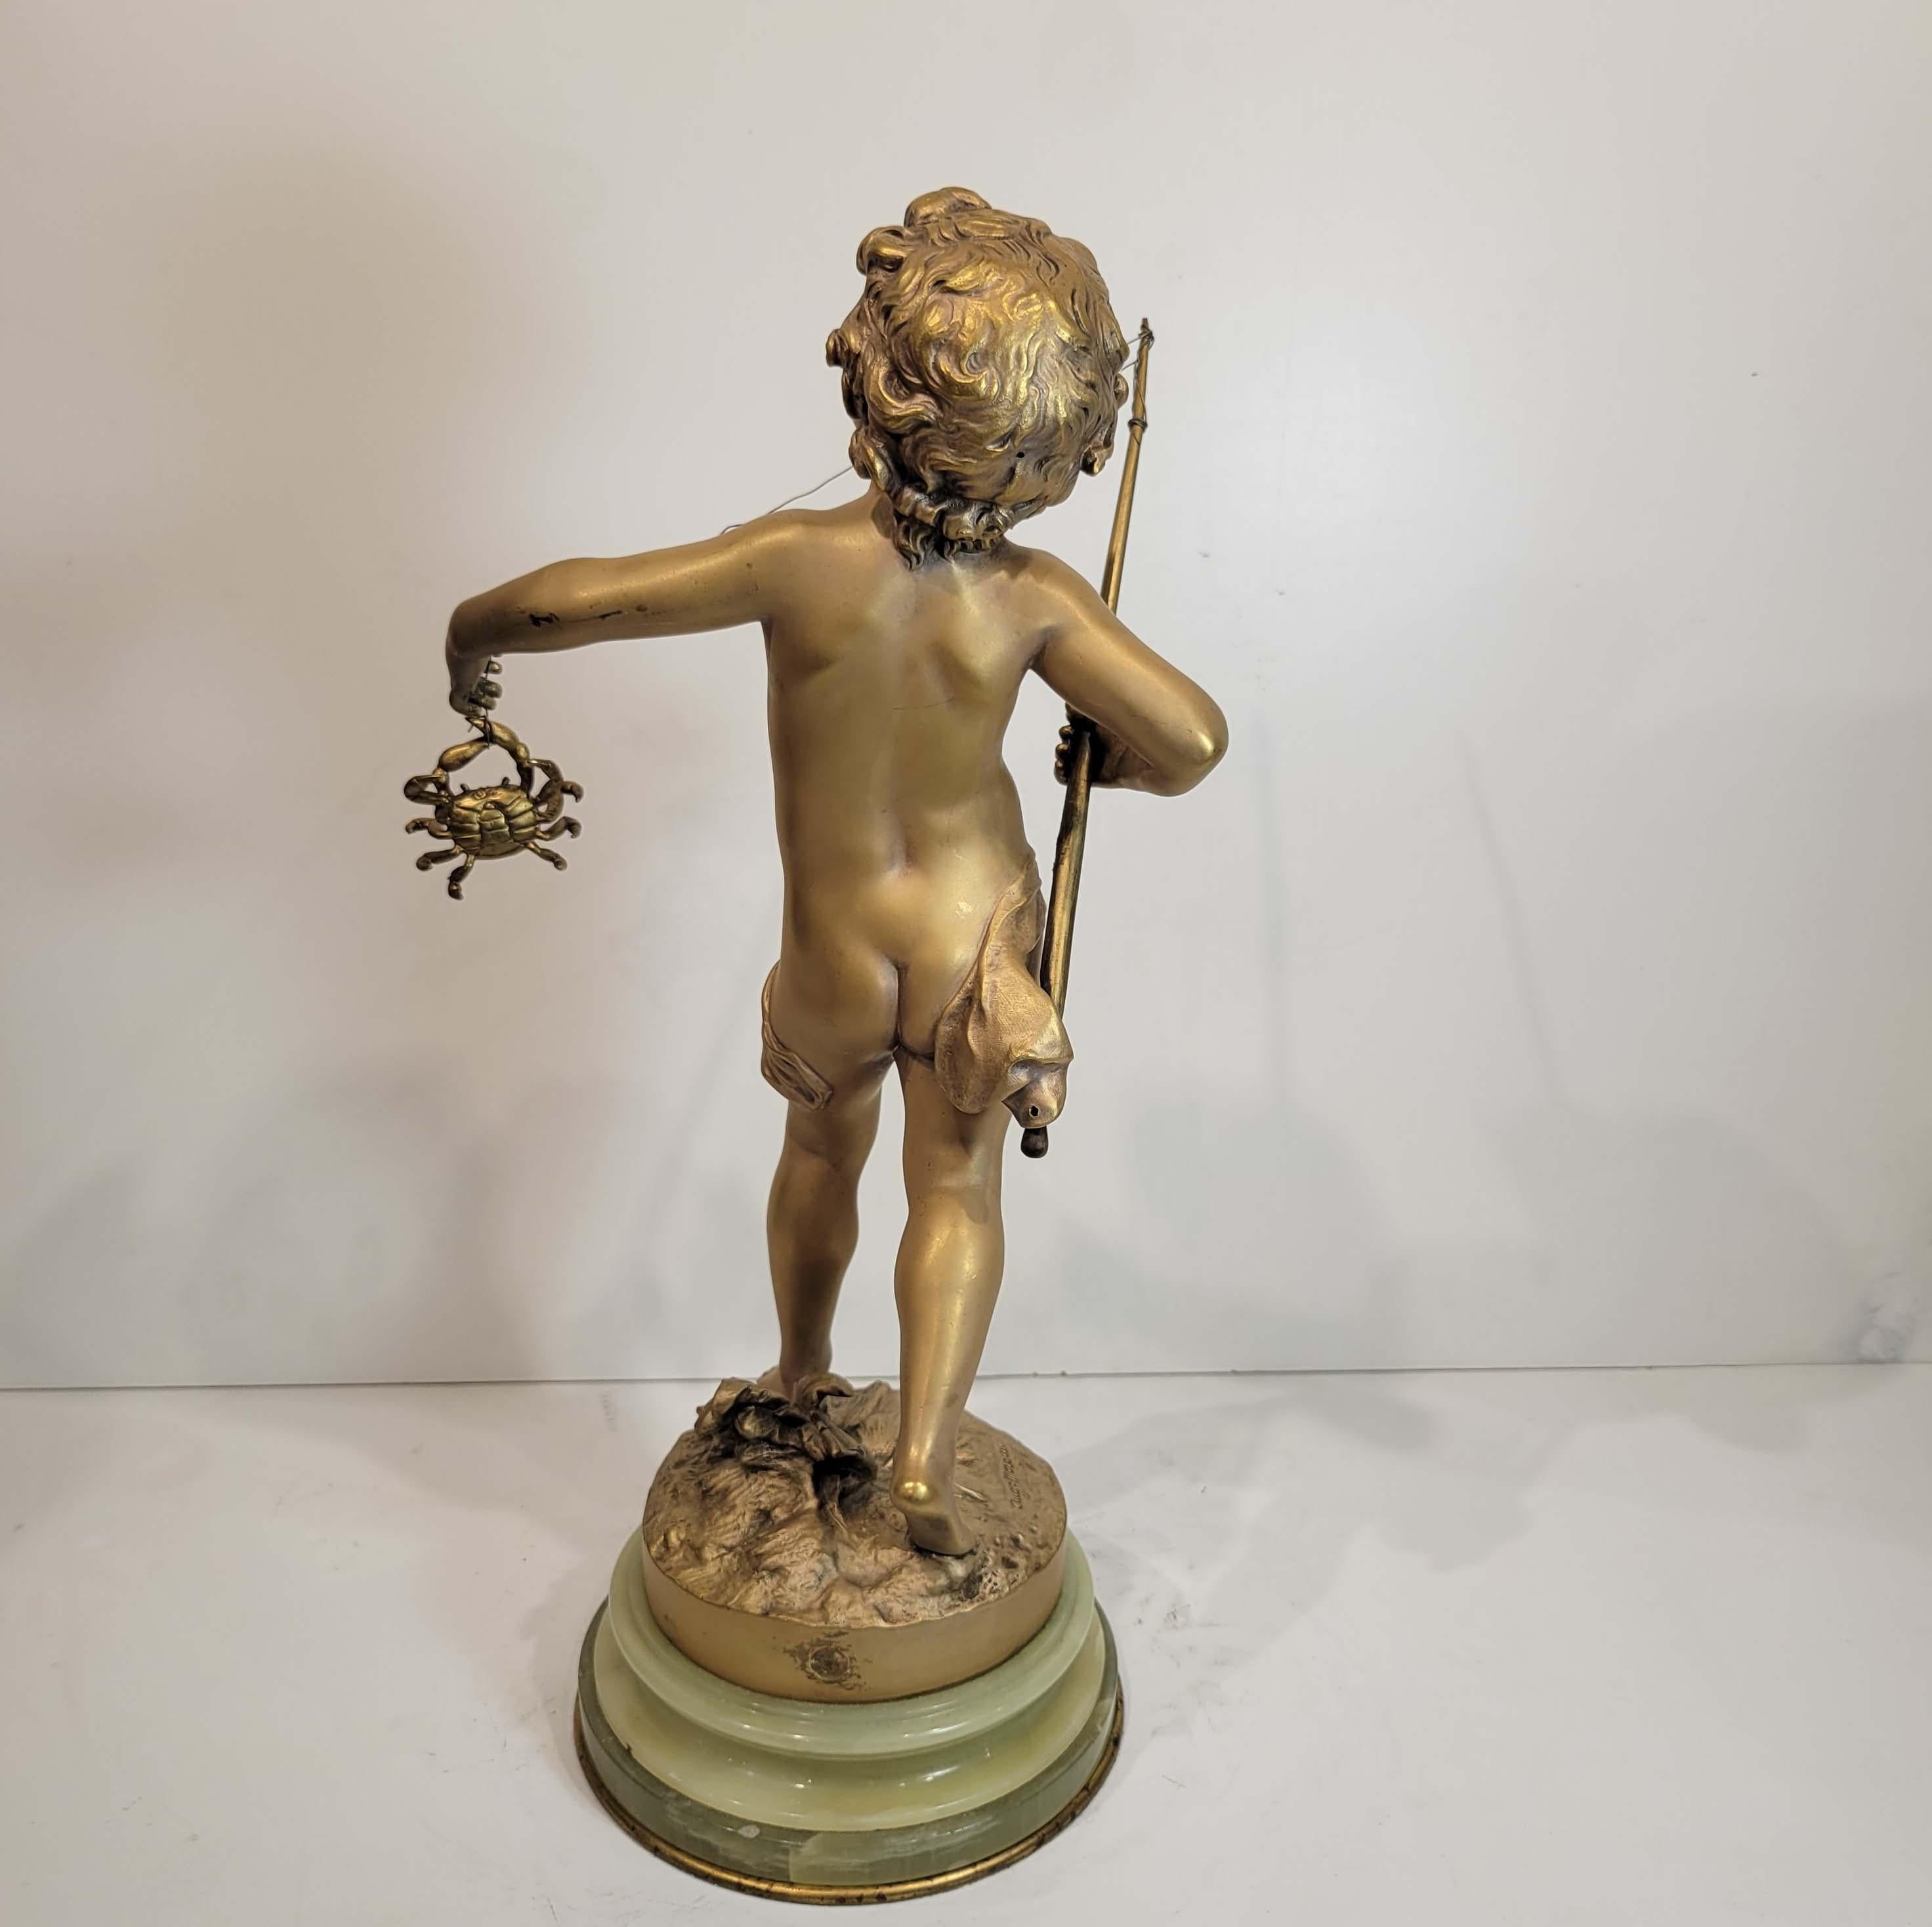 An adorable gilt bronze sculpture of a boy fishing a crab in his surprise. Wonderful details and original matte gilding on an onyx and bronze base. Signed on the base 